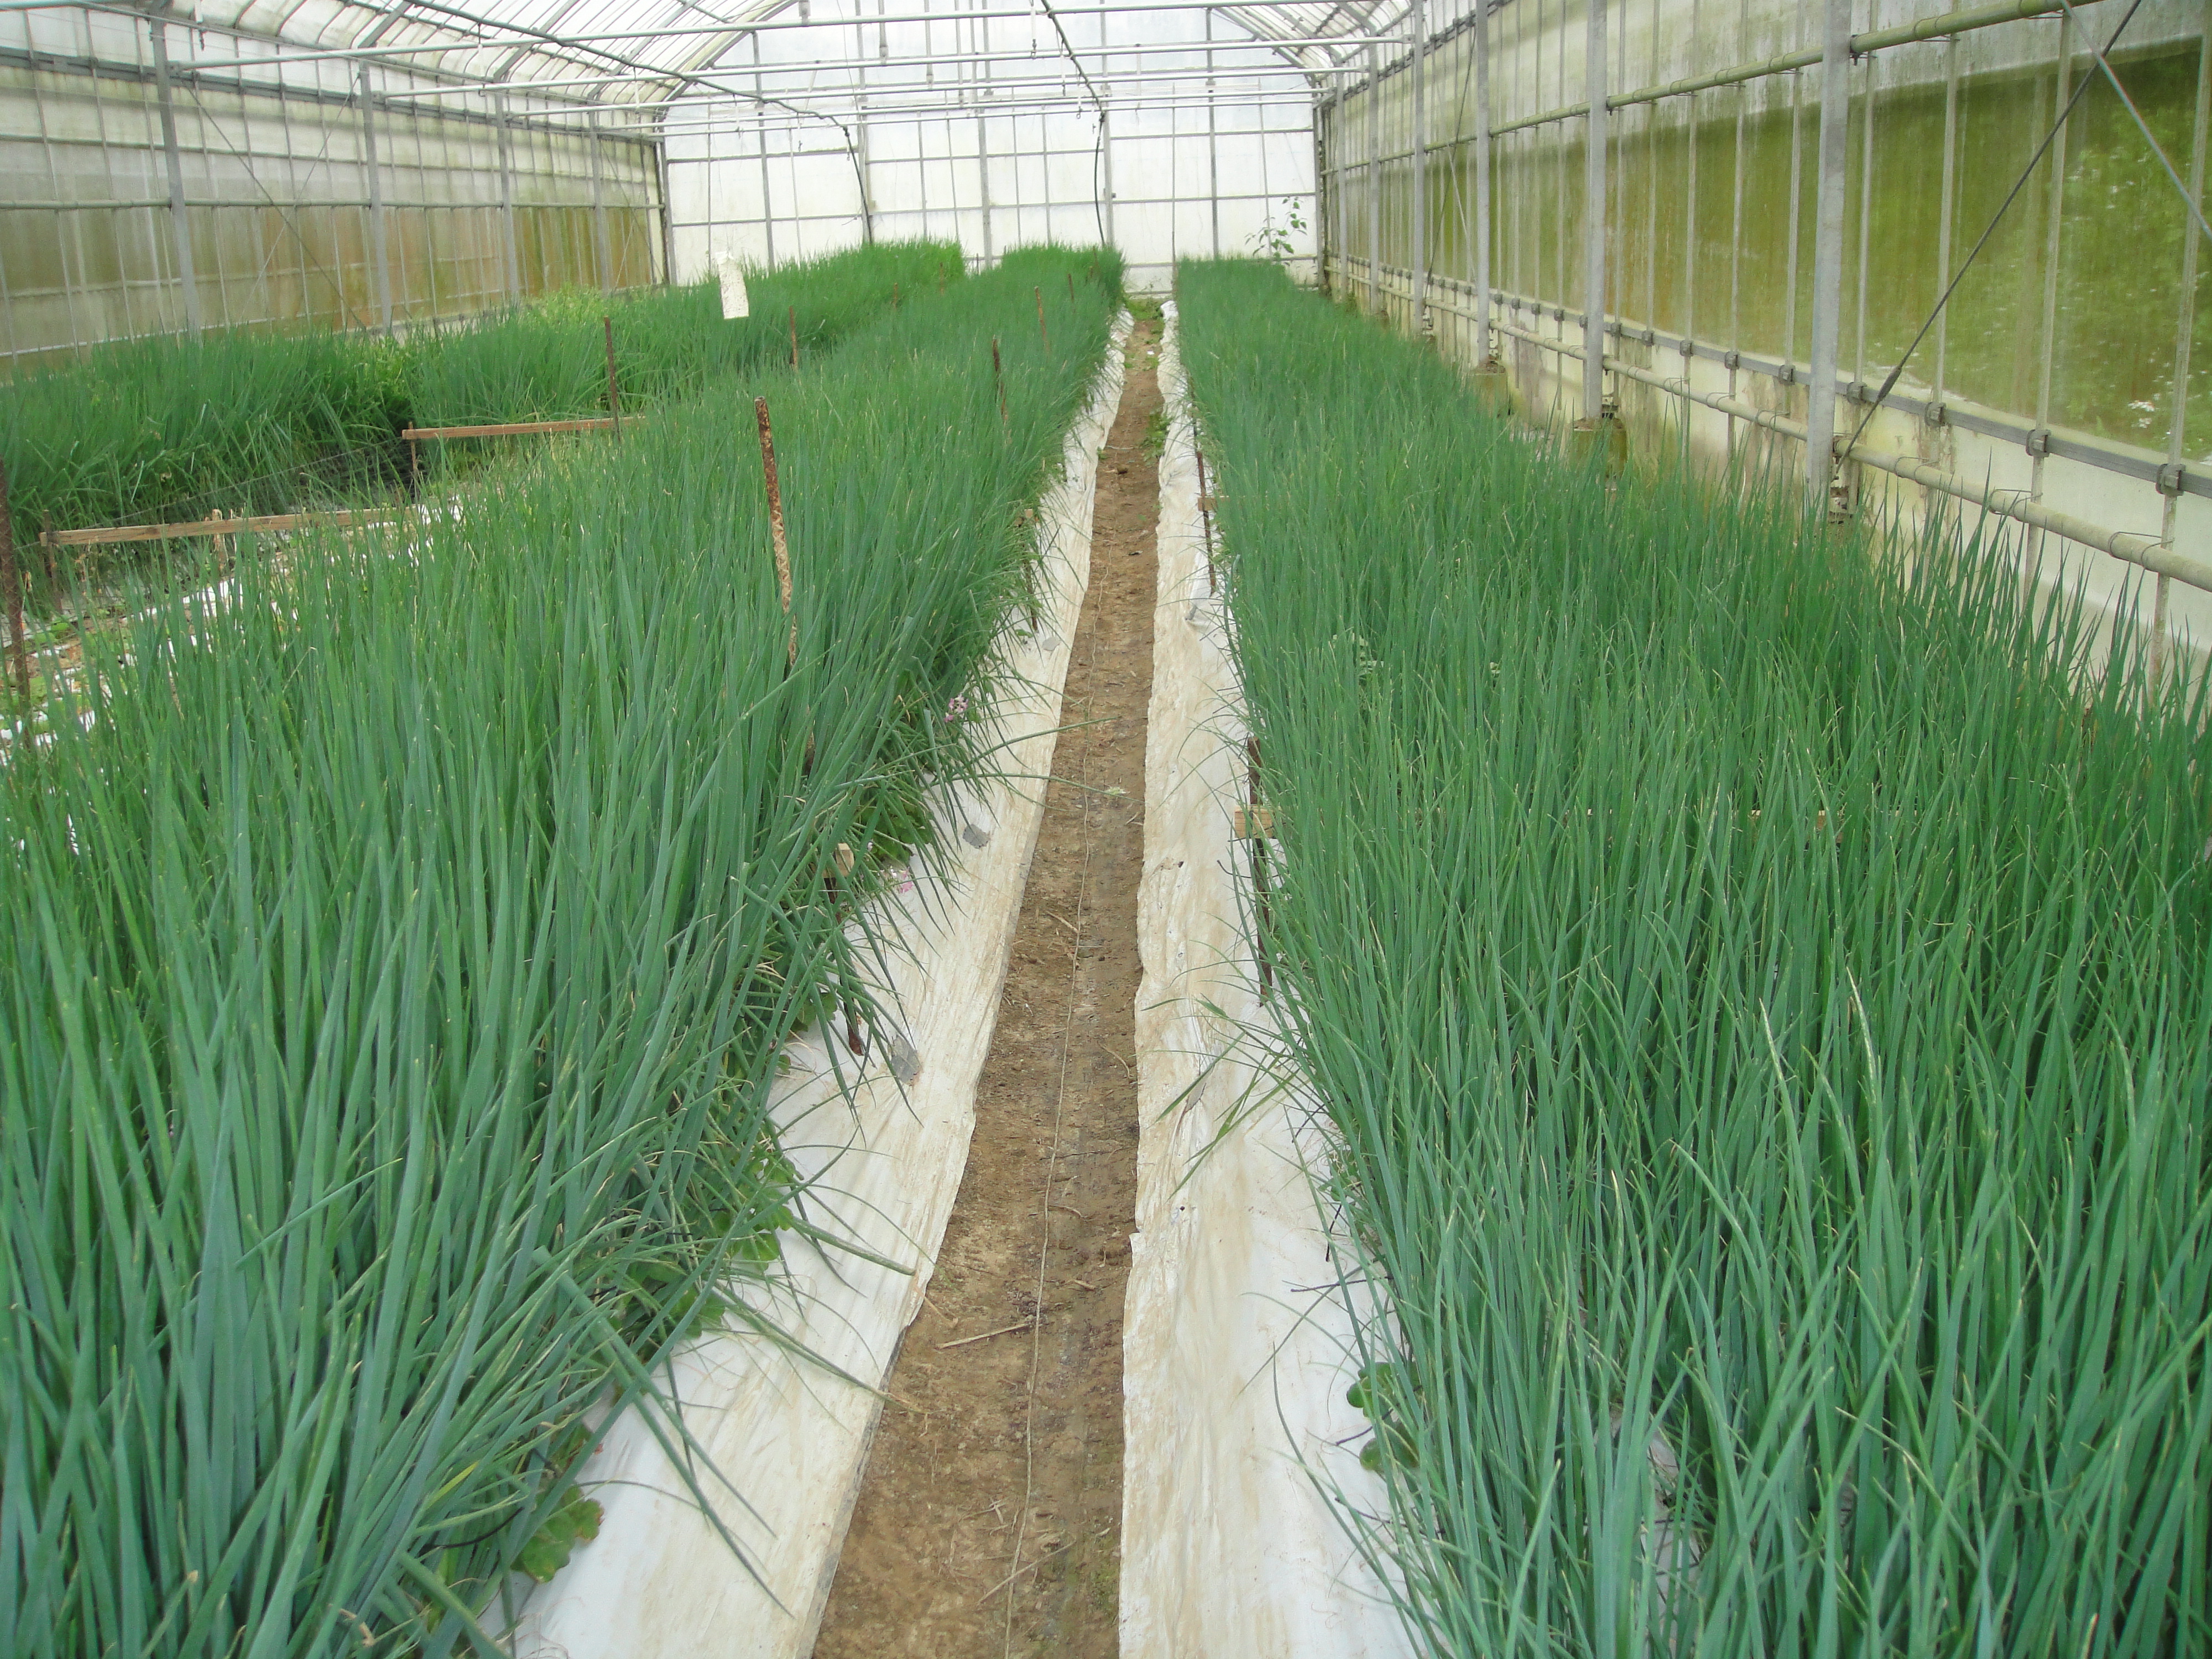 Scallions to which 200kg of salt per 10ares was applied
